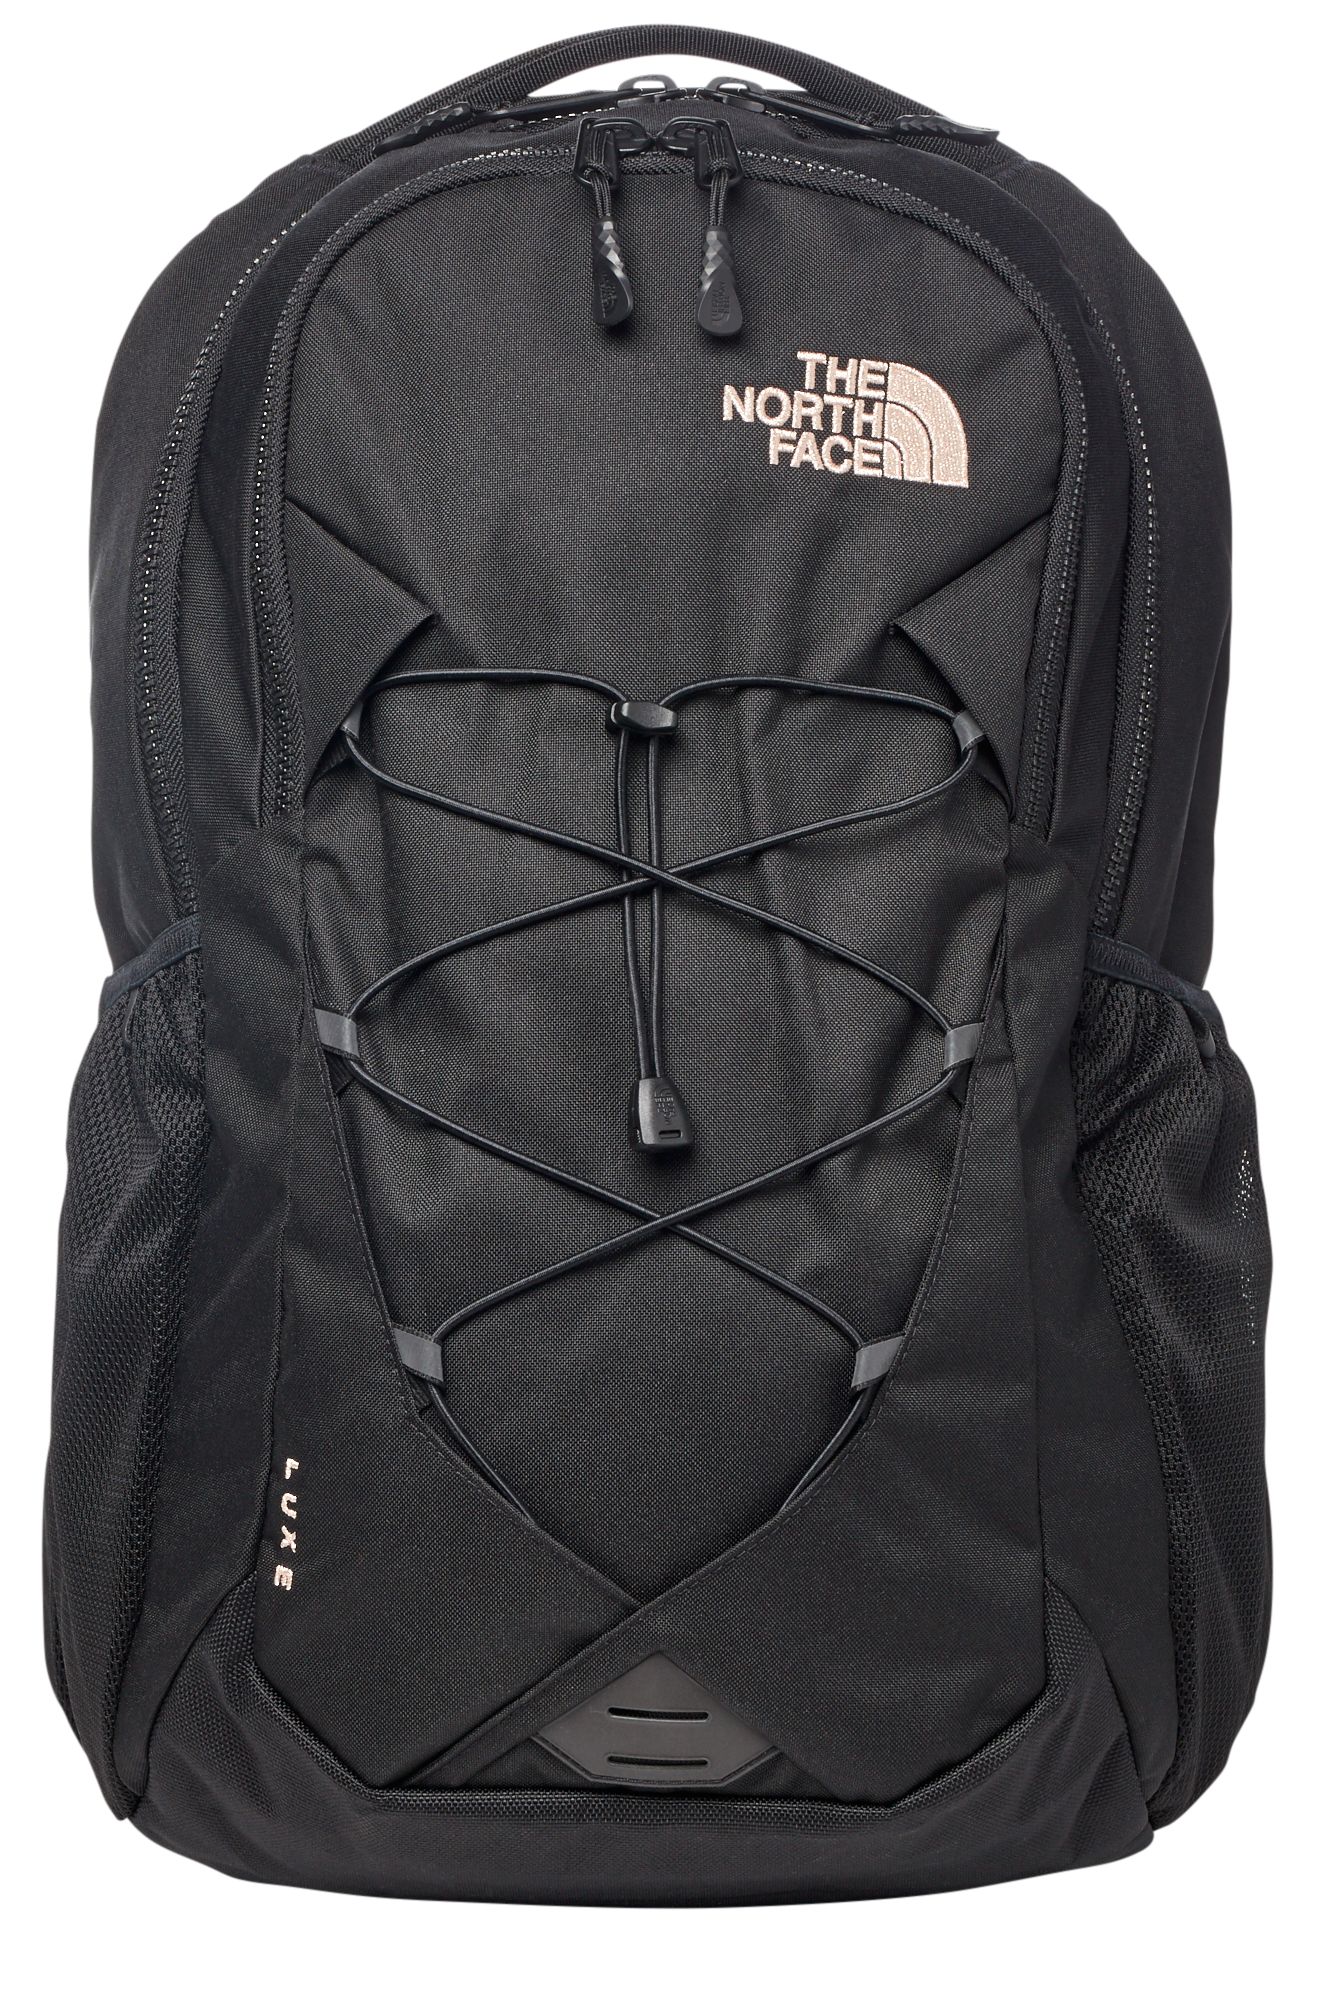 The North Face Backpacks | DICK'S 